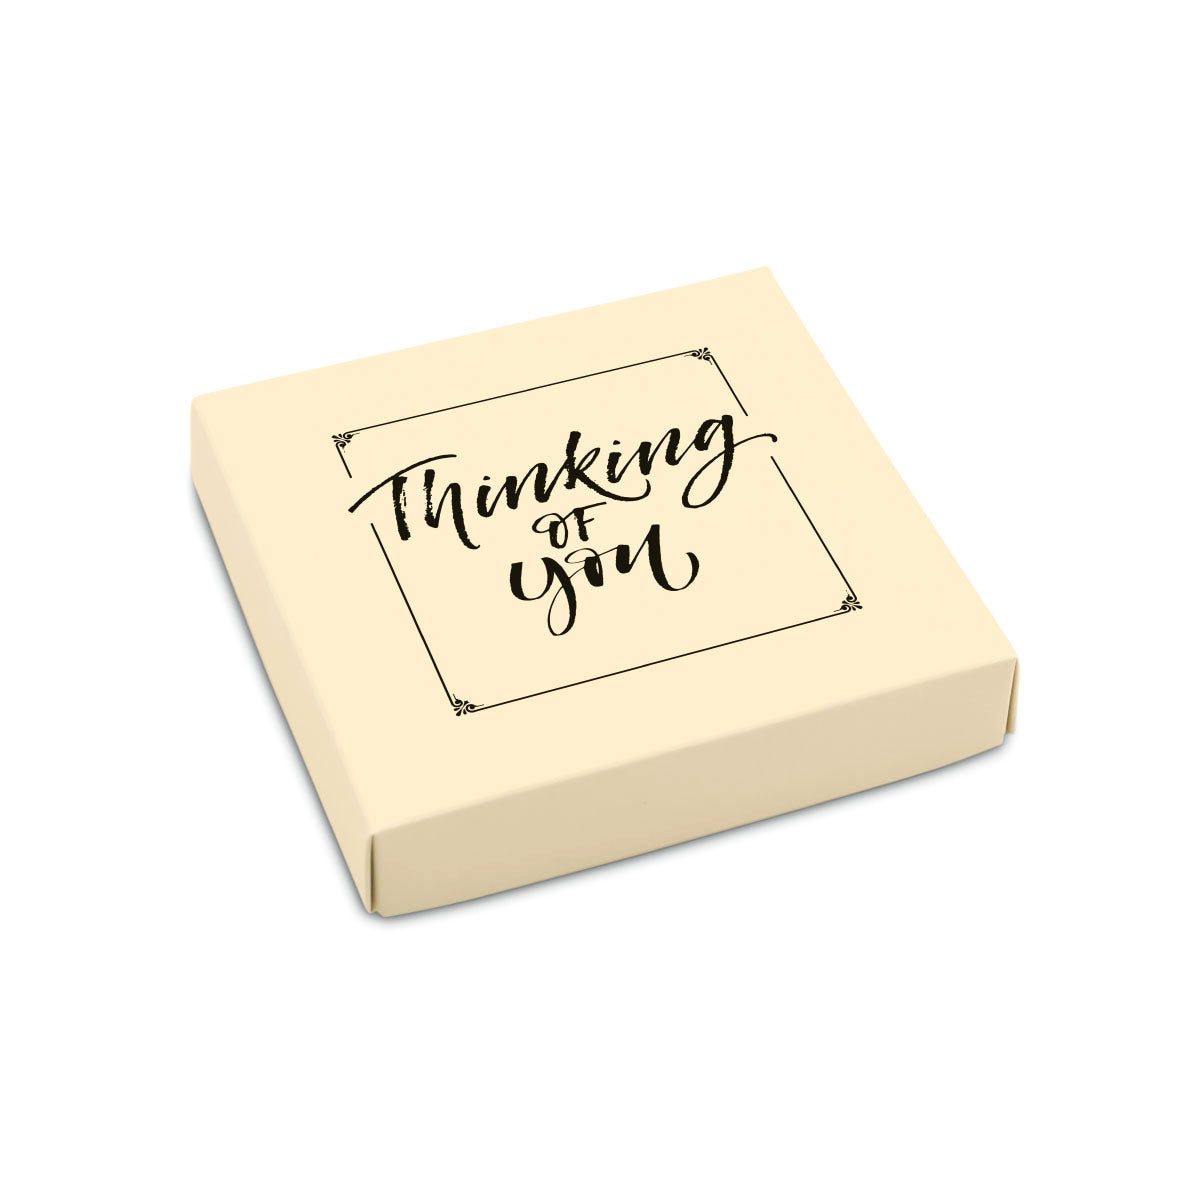 Thinking of You Themed Box Cover for 16 Piece Holiday Assortment